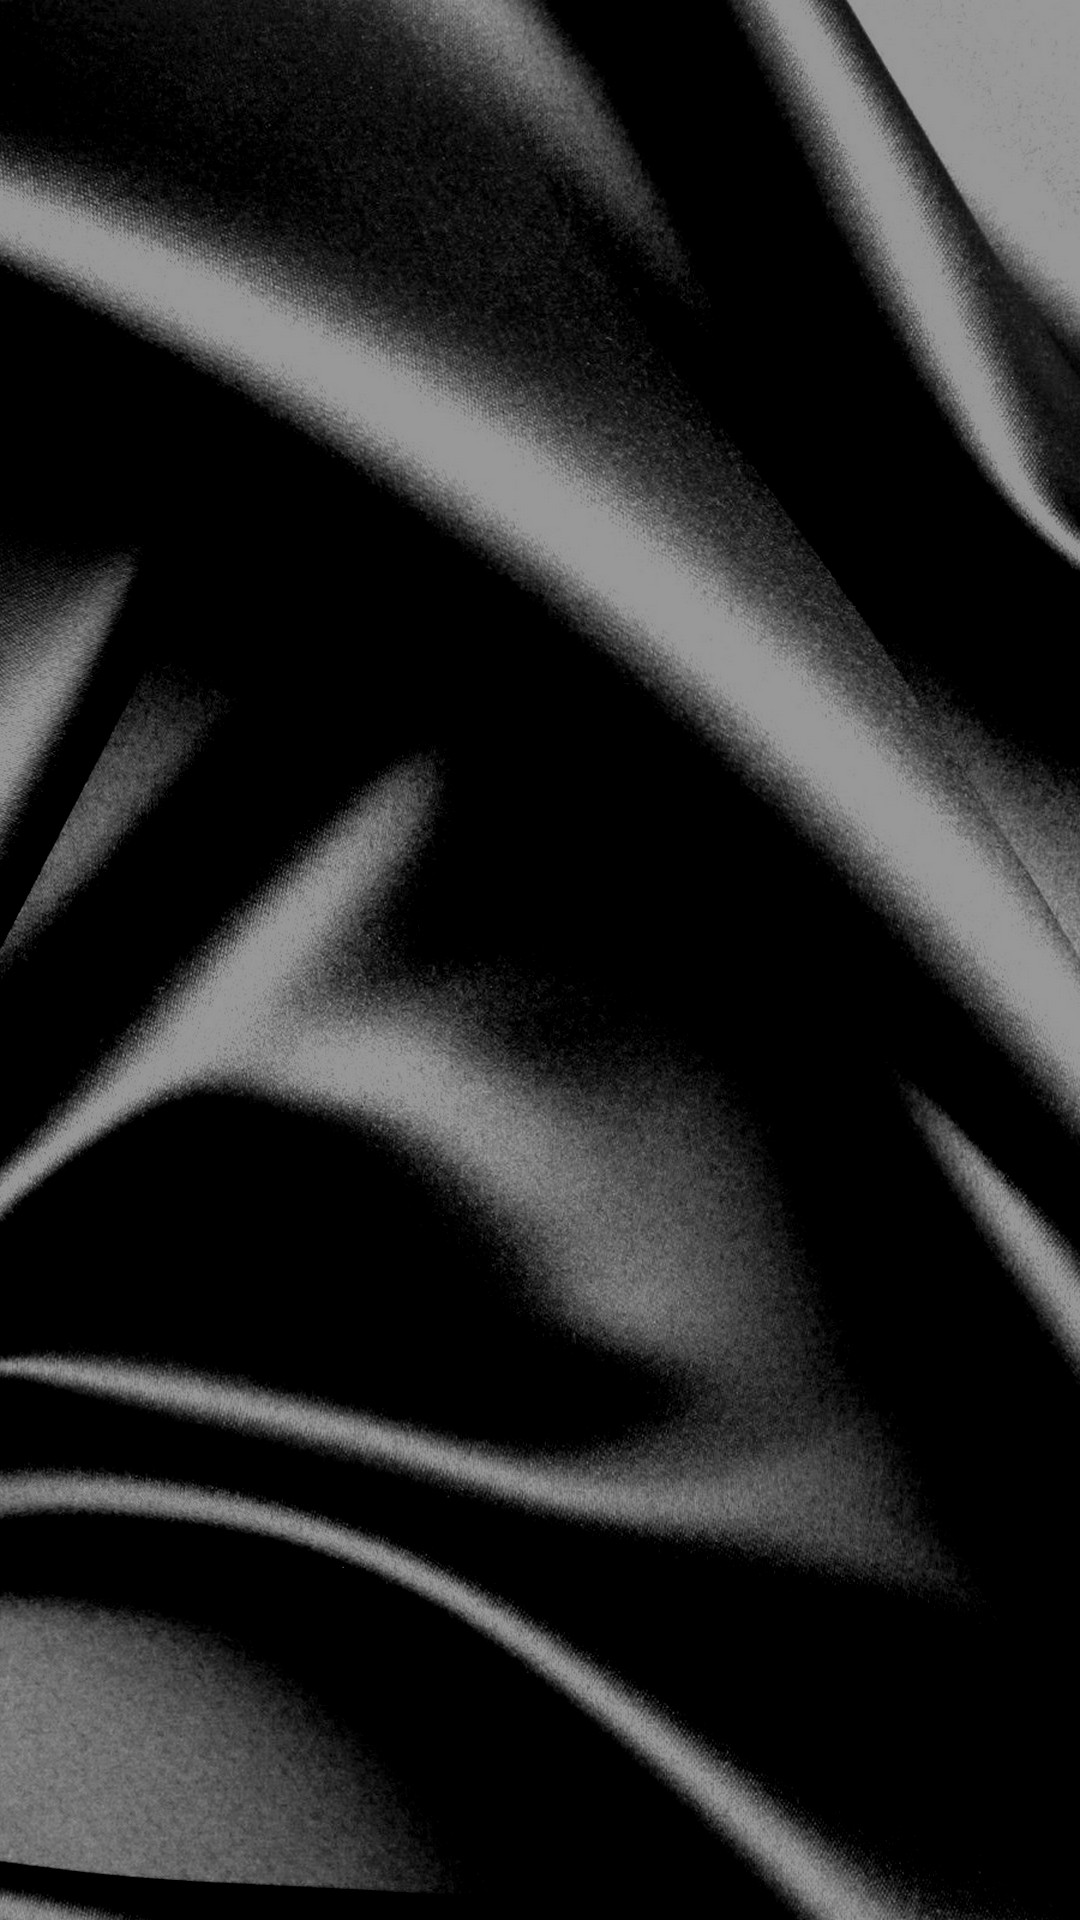 Black Silk iPhone Wallpaper HD with high-resolution 1080x1920 pixel. You can set as wallpaper for Apple iPhone X, XS Max, XR, 8, 7, 6, SE, iPad. Enjoy and share your favorite HD wallpapers and background images